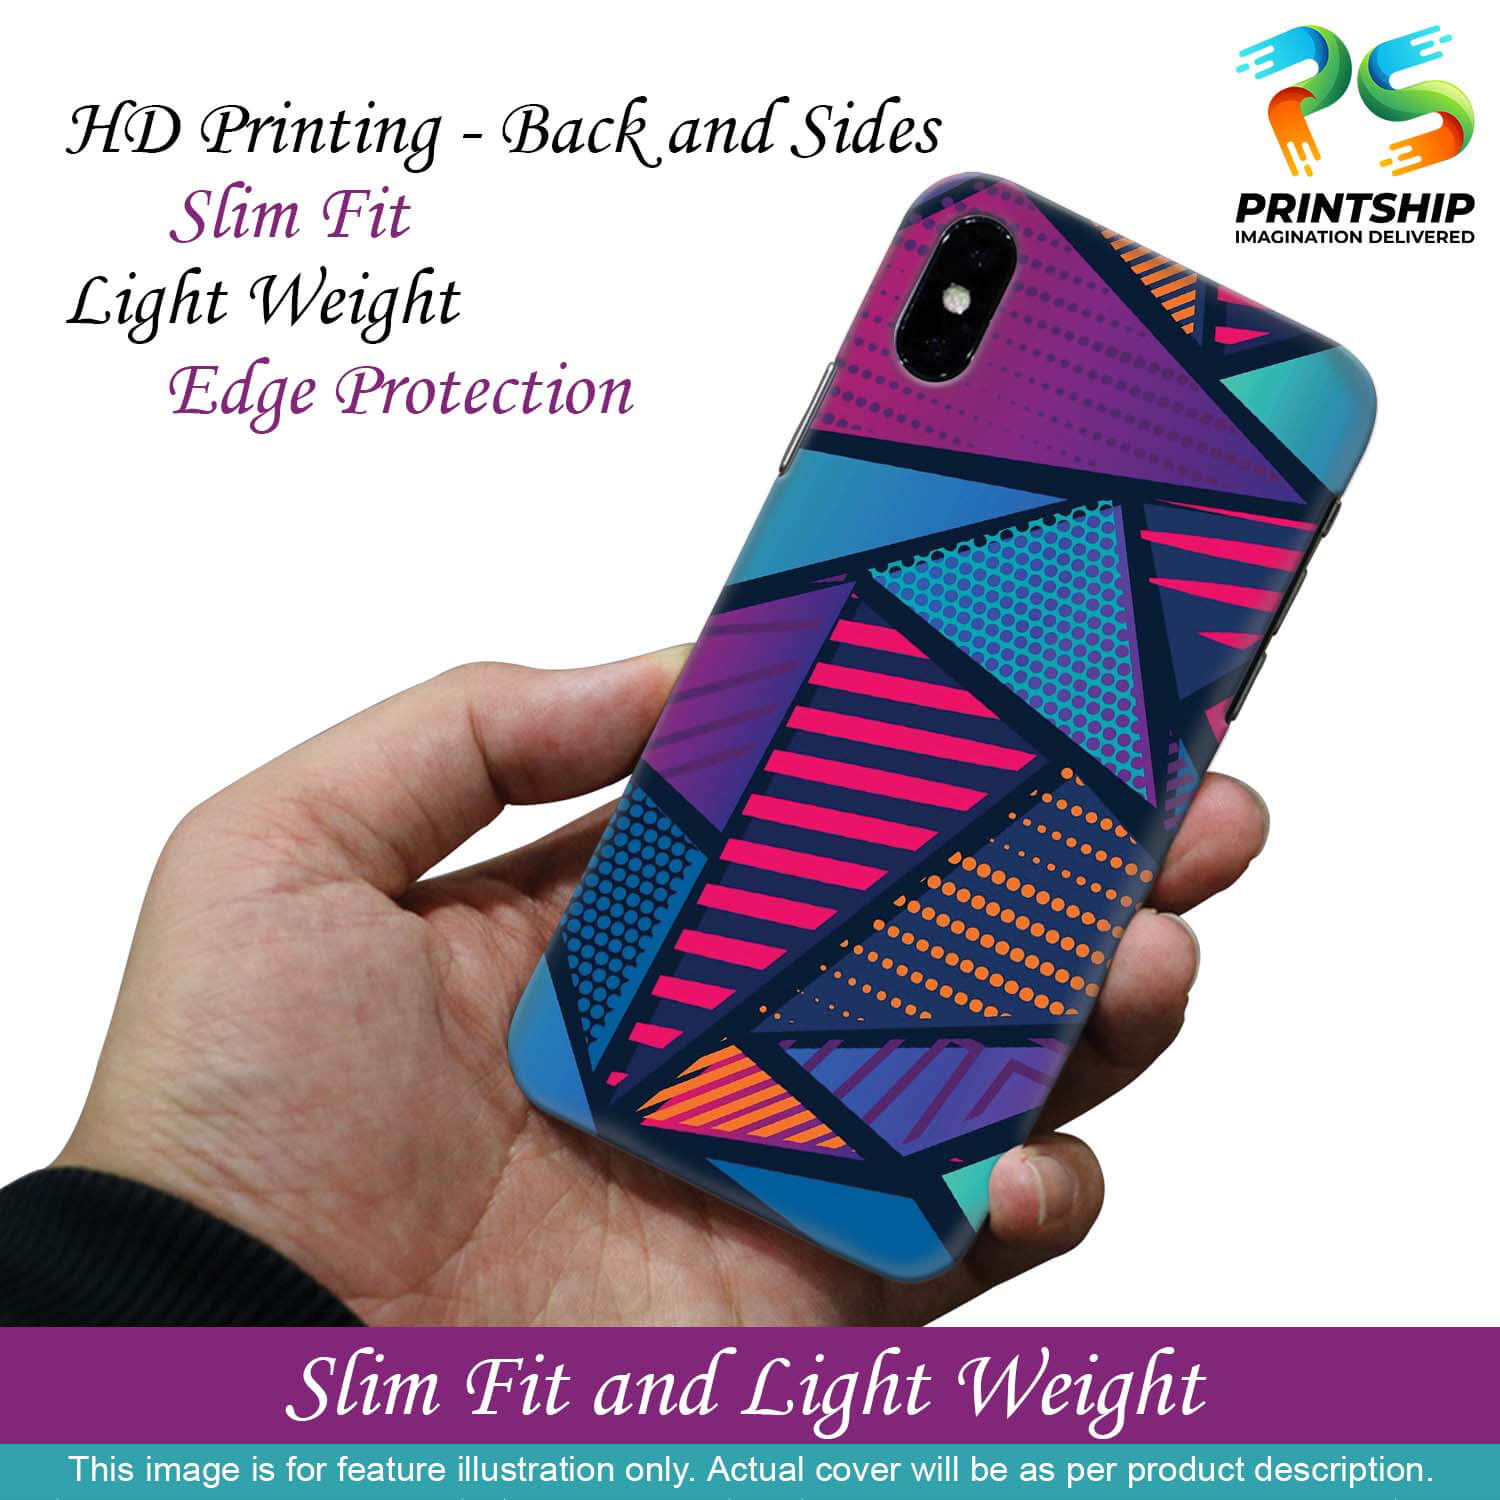 PS1335-Geometric Pattern Back Cover for Oppo Reno6 Pro 5G